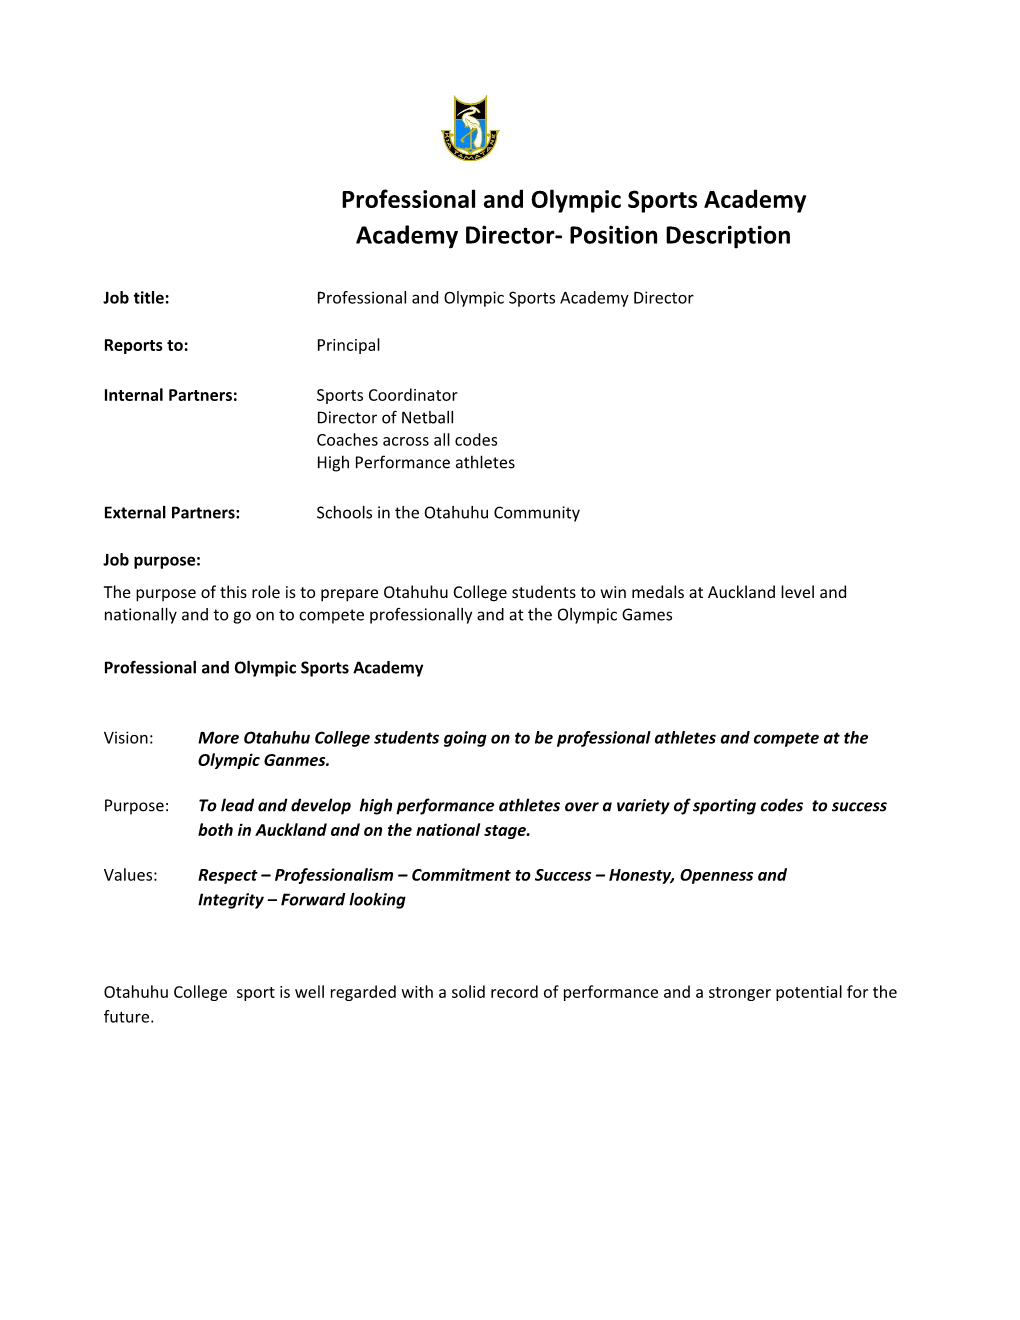 Professional and Olympic Sports Academy